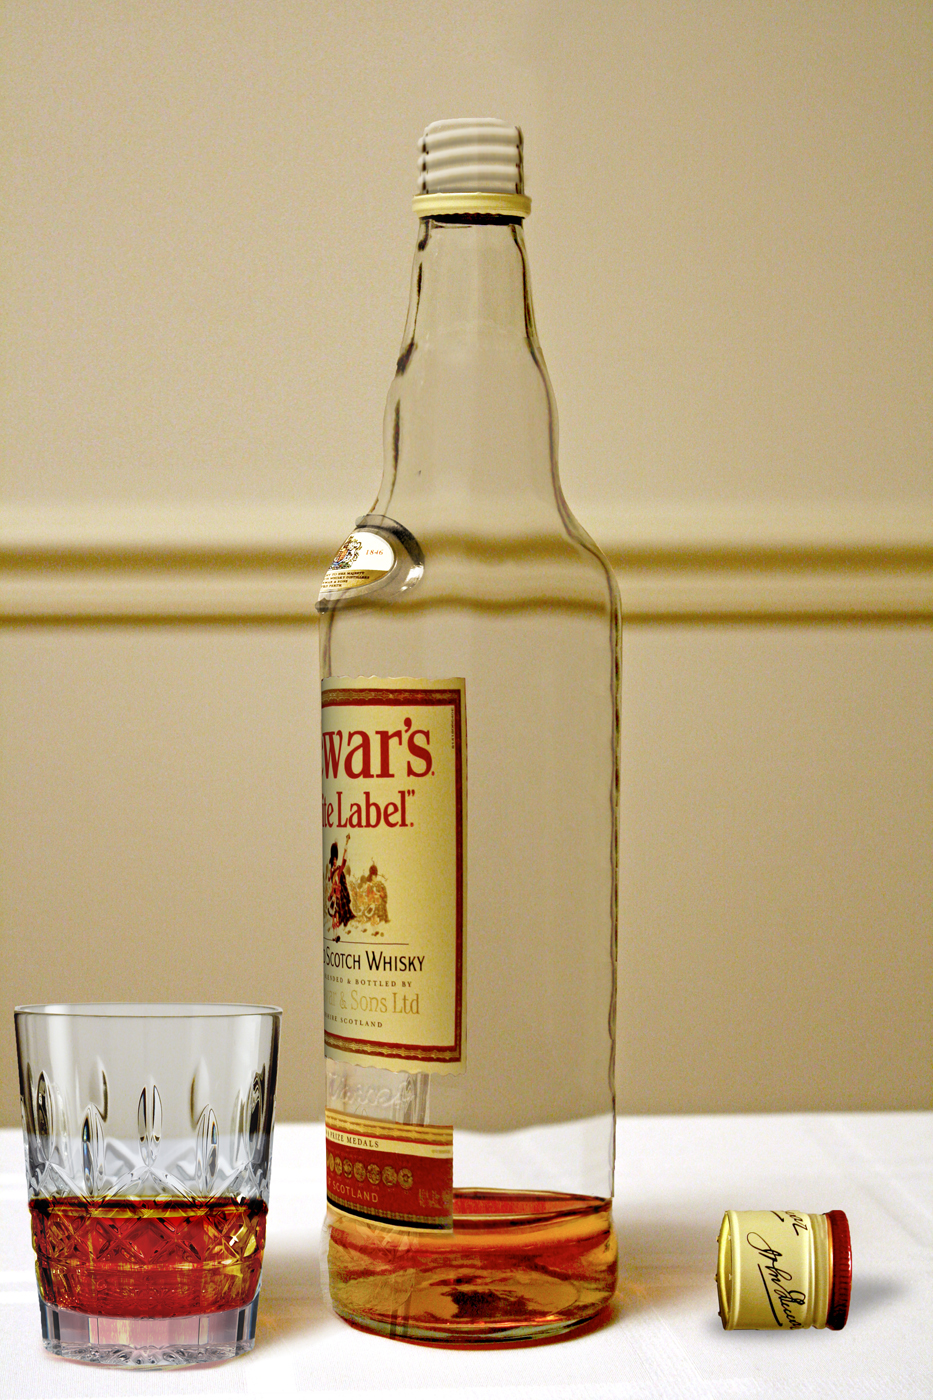 Almost empty whisky bottle